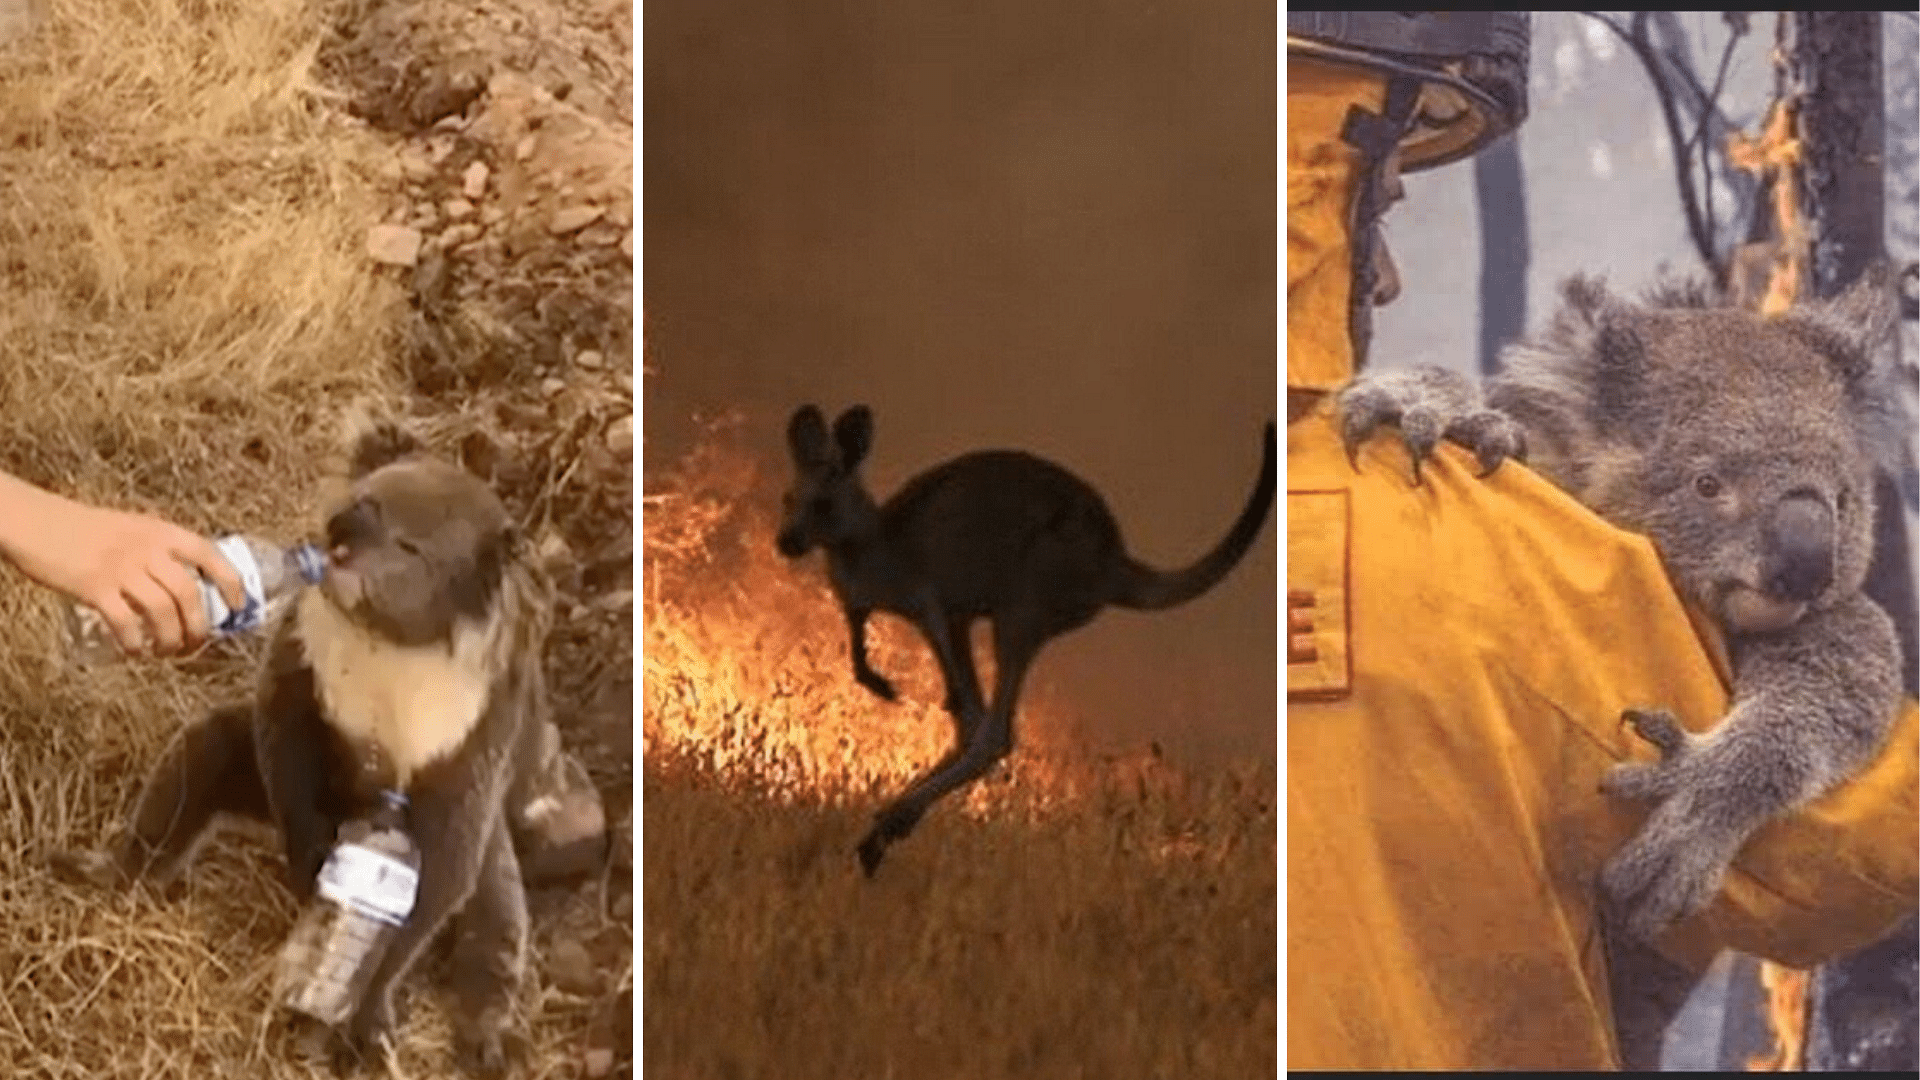 University of Sydney has estimated that 480 million mammals, birds and reptiles were killed in the fire.